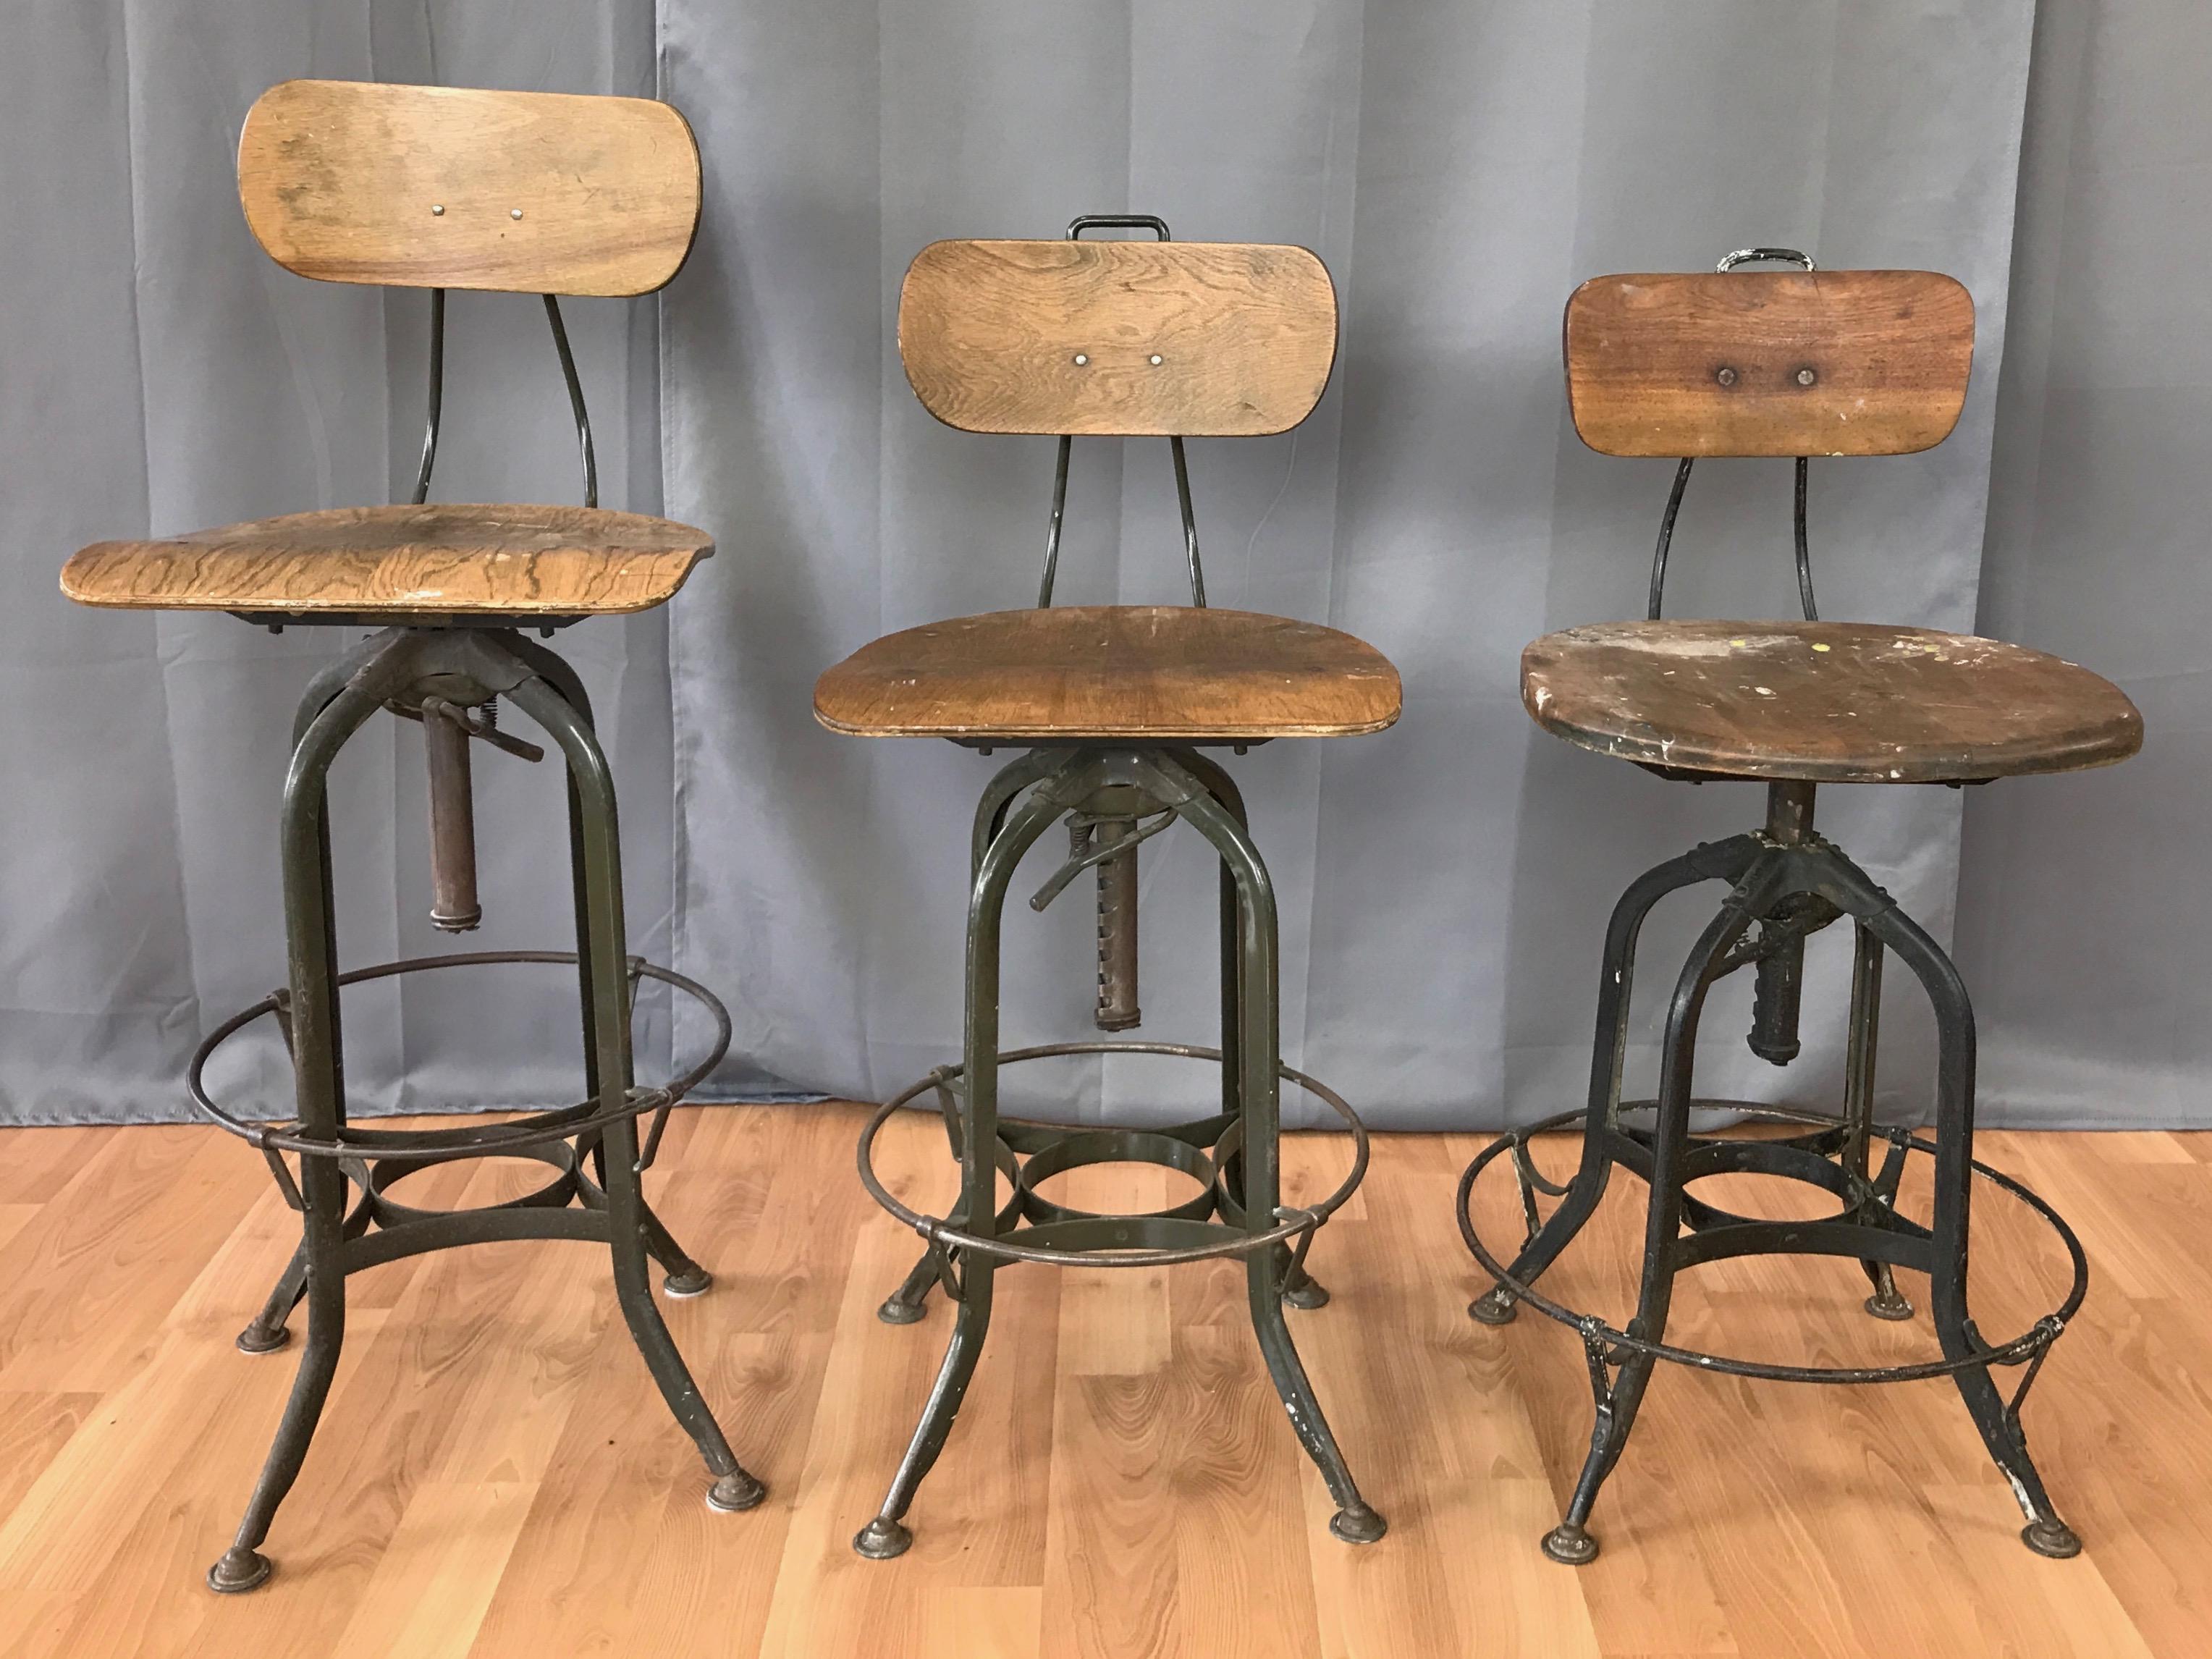 Two 1930s industrial adjustable height swivel stools with backs by Toledo Metal Furniture Company, offered individually. Stool pictured on the far right has sold.

Green enameled steel base and frame with adjustable height bentwood swivel seats.